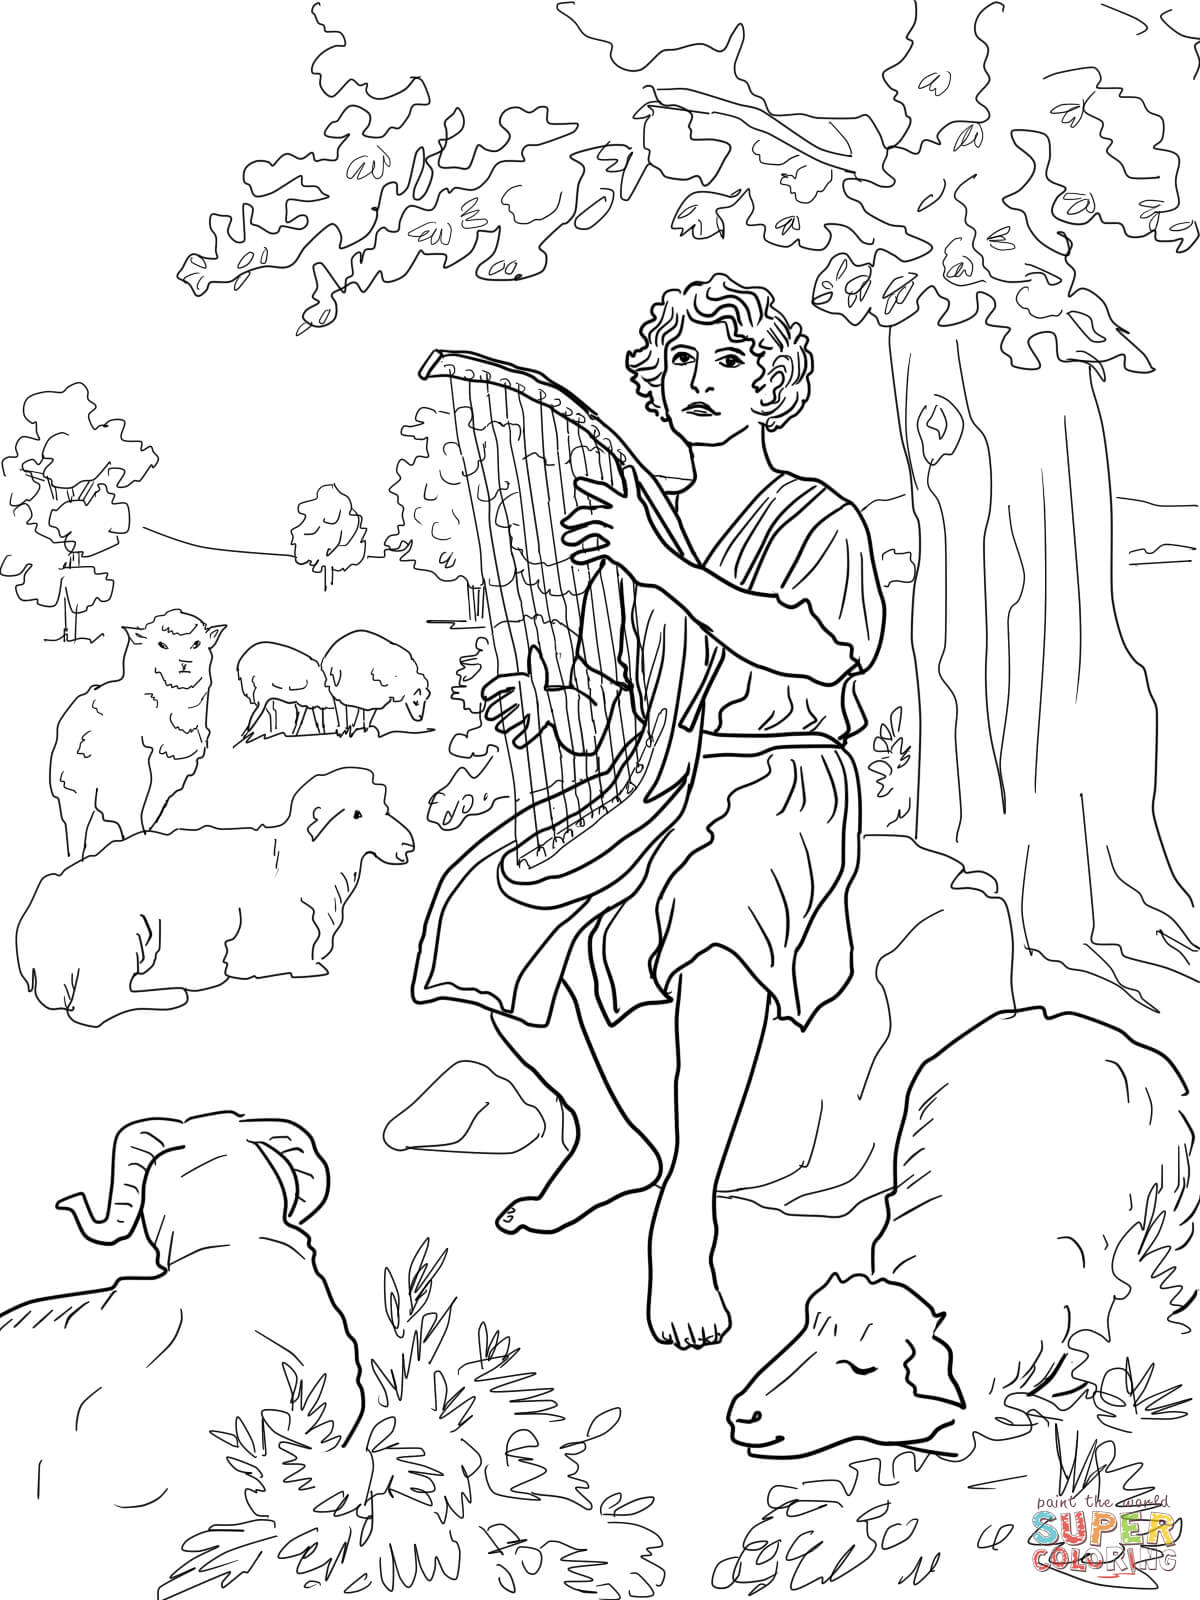 Absalom Death coloring page | Free Printable Coloring Pages